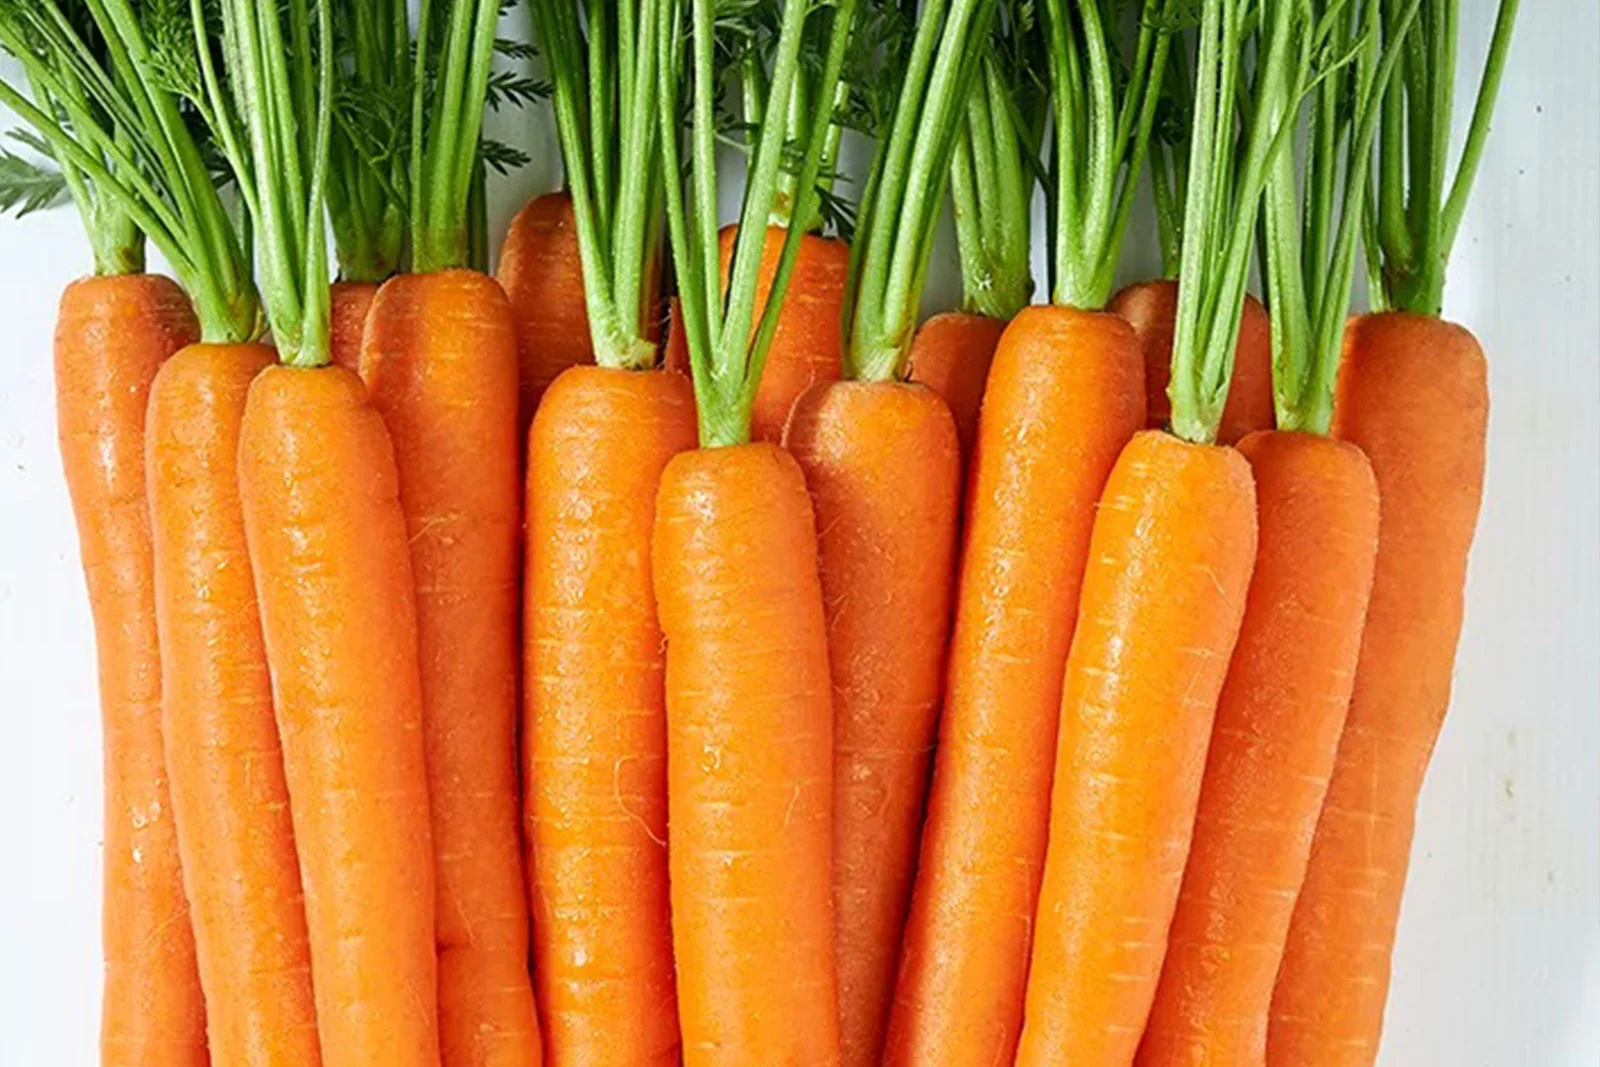 Carrot day featuring carrots (with stem)